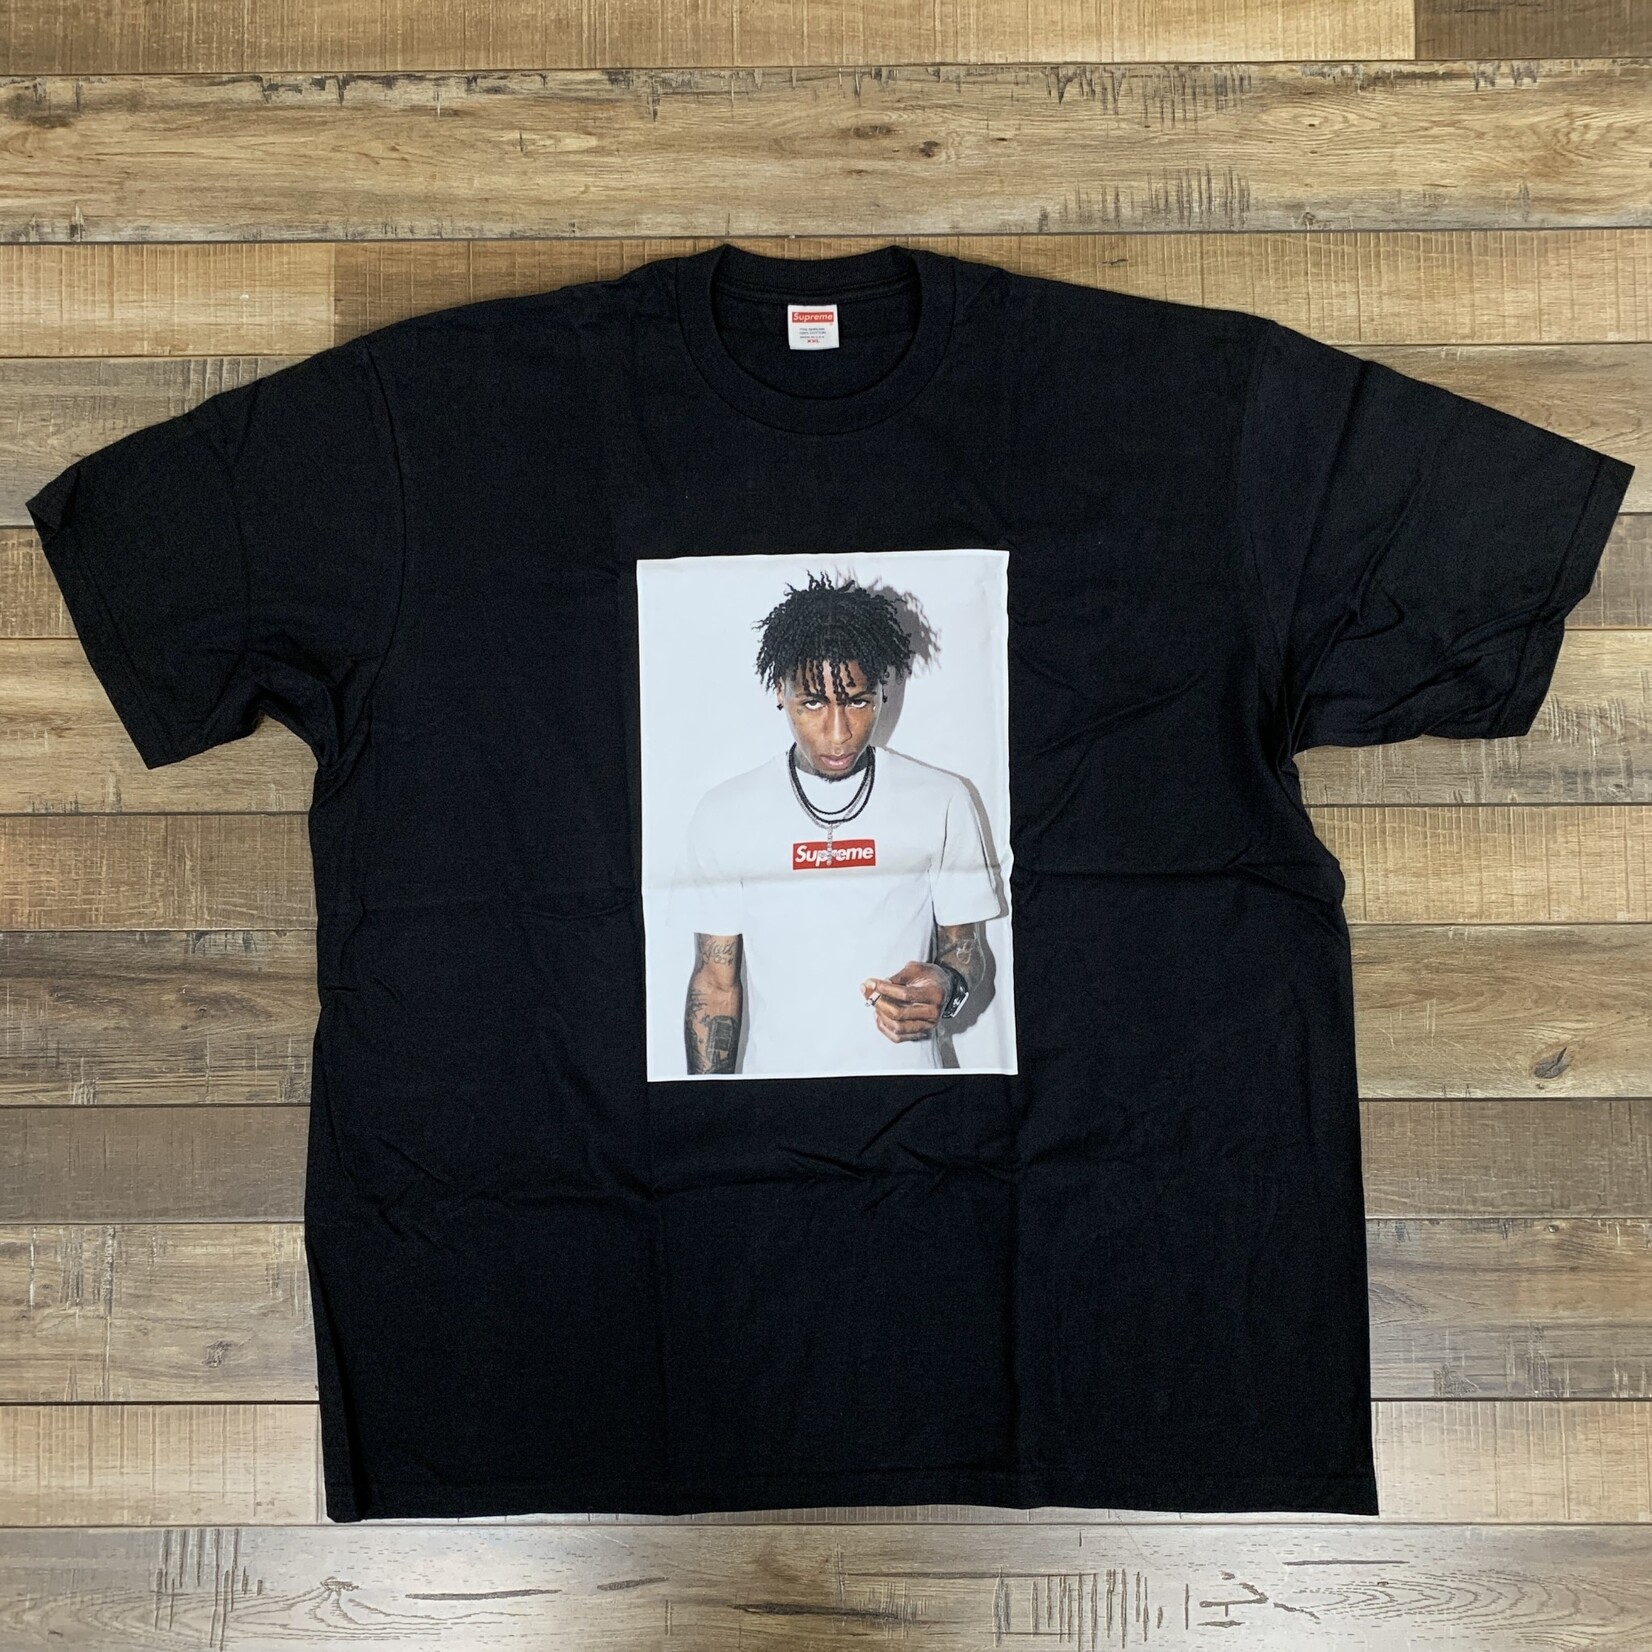 Supreme NBA Youngboy Tee Black - Holy Ground Sneaker Shop - Buy ...